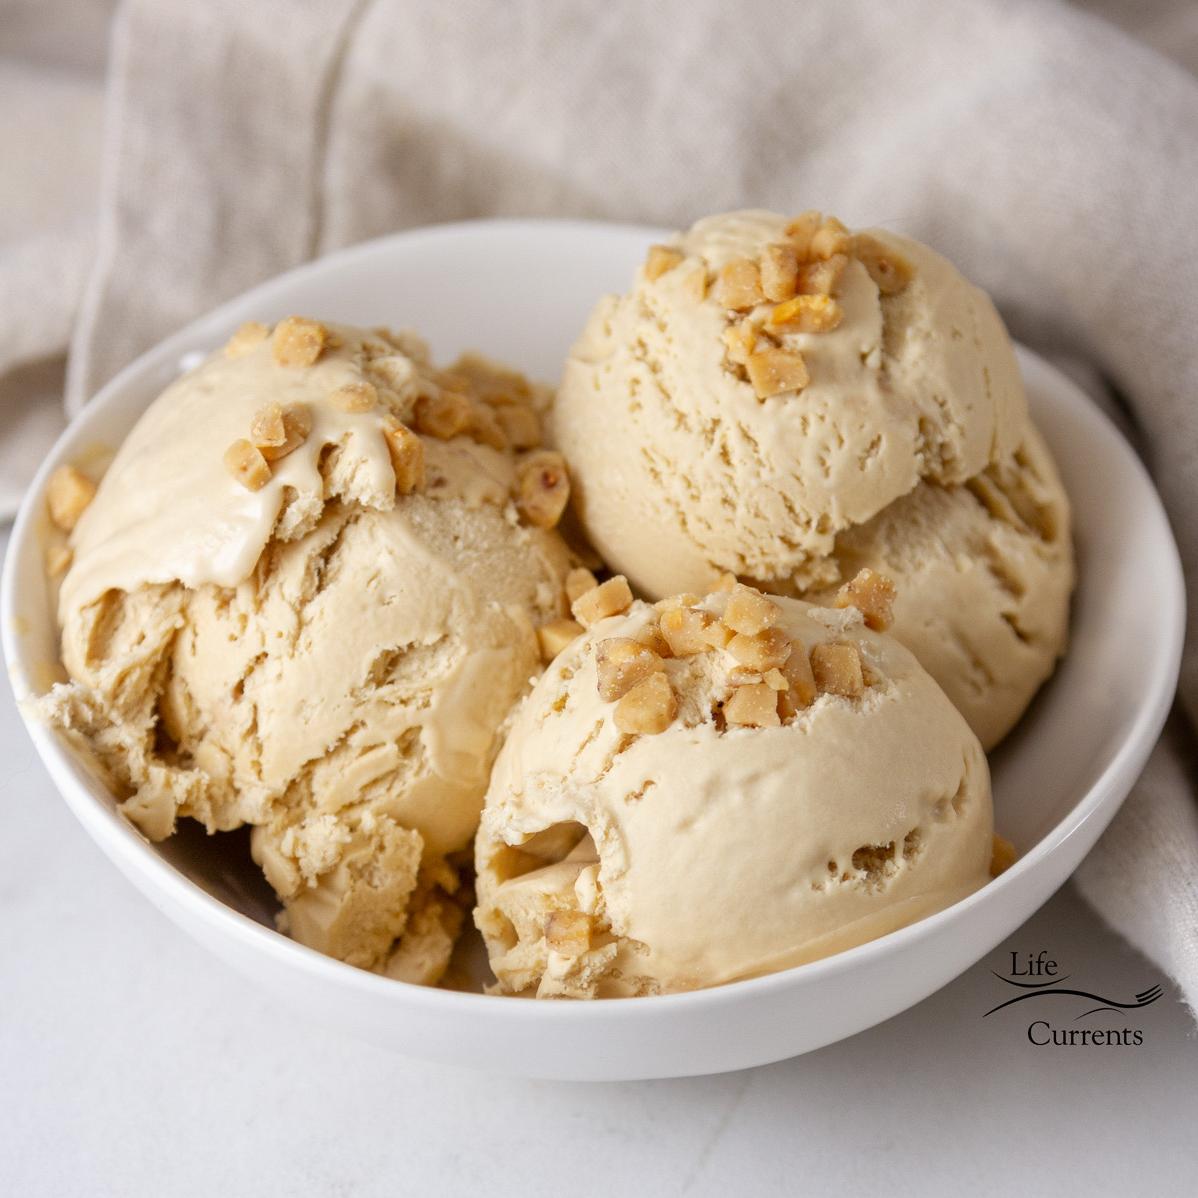  Take a scoop of heaven with Toffee Coffee Ice Cream! 🍦☕